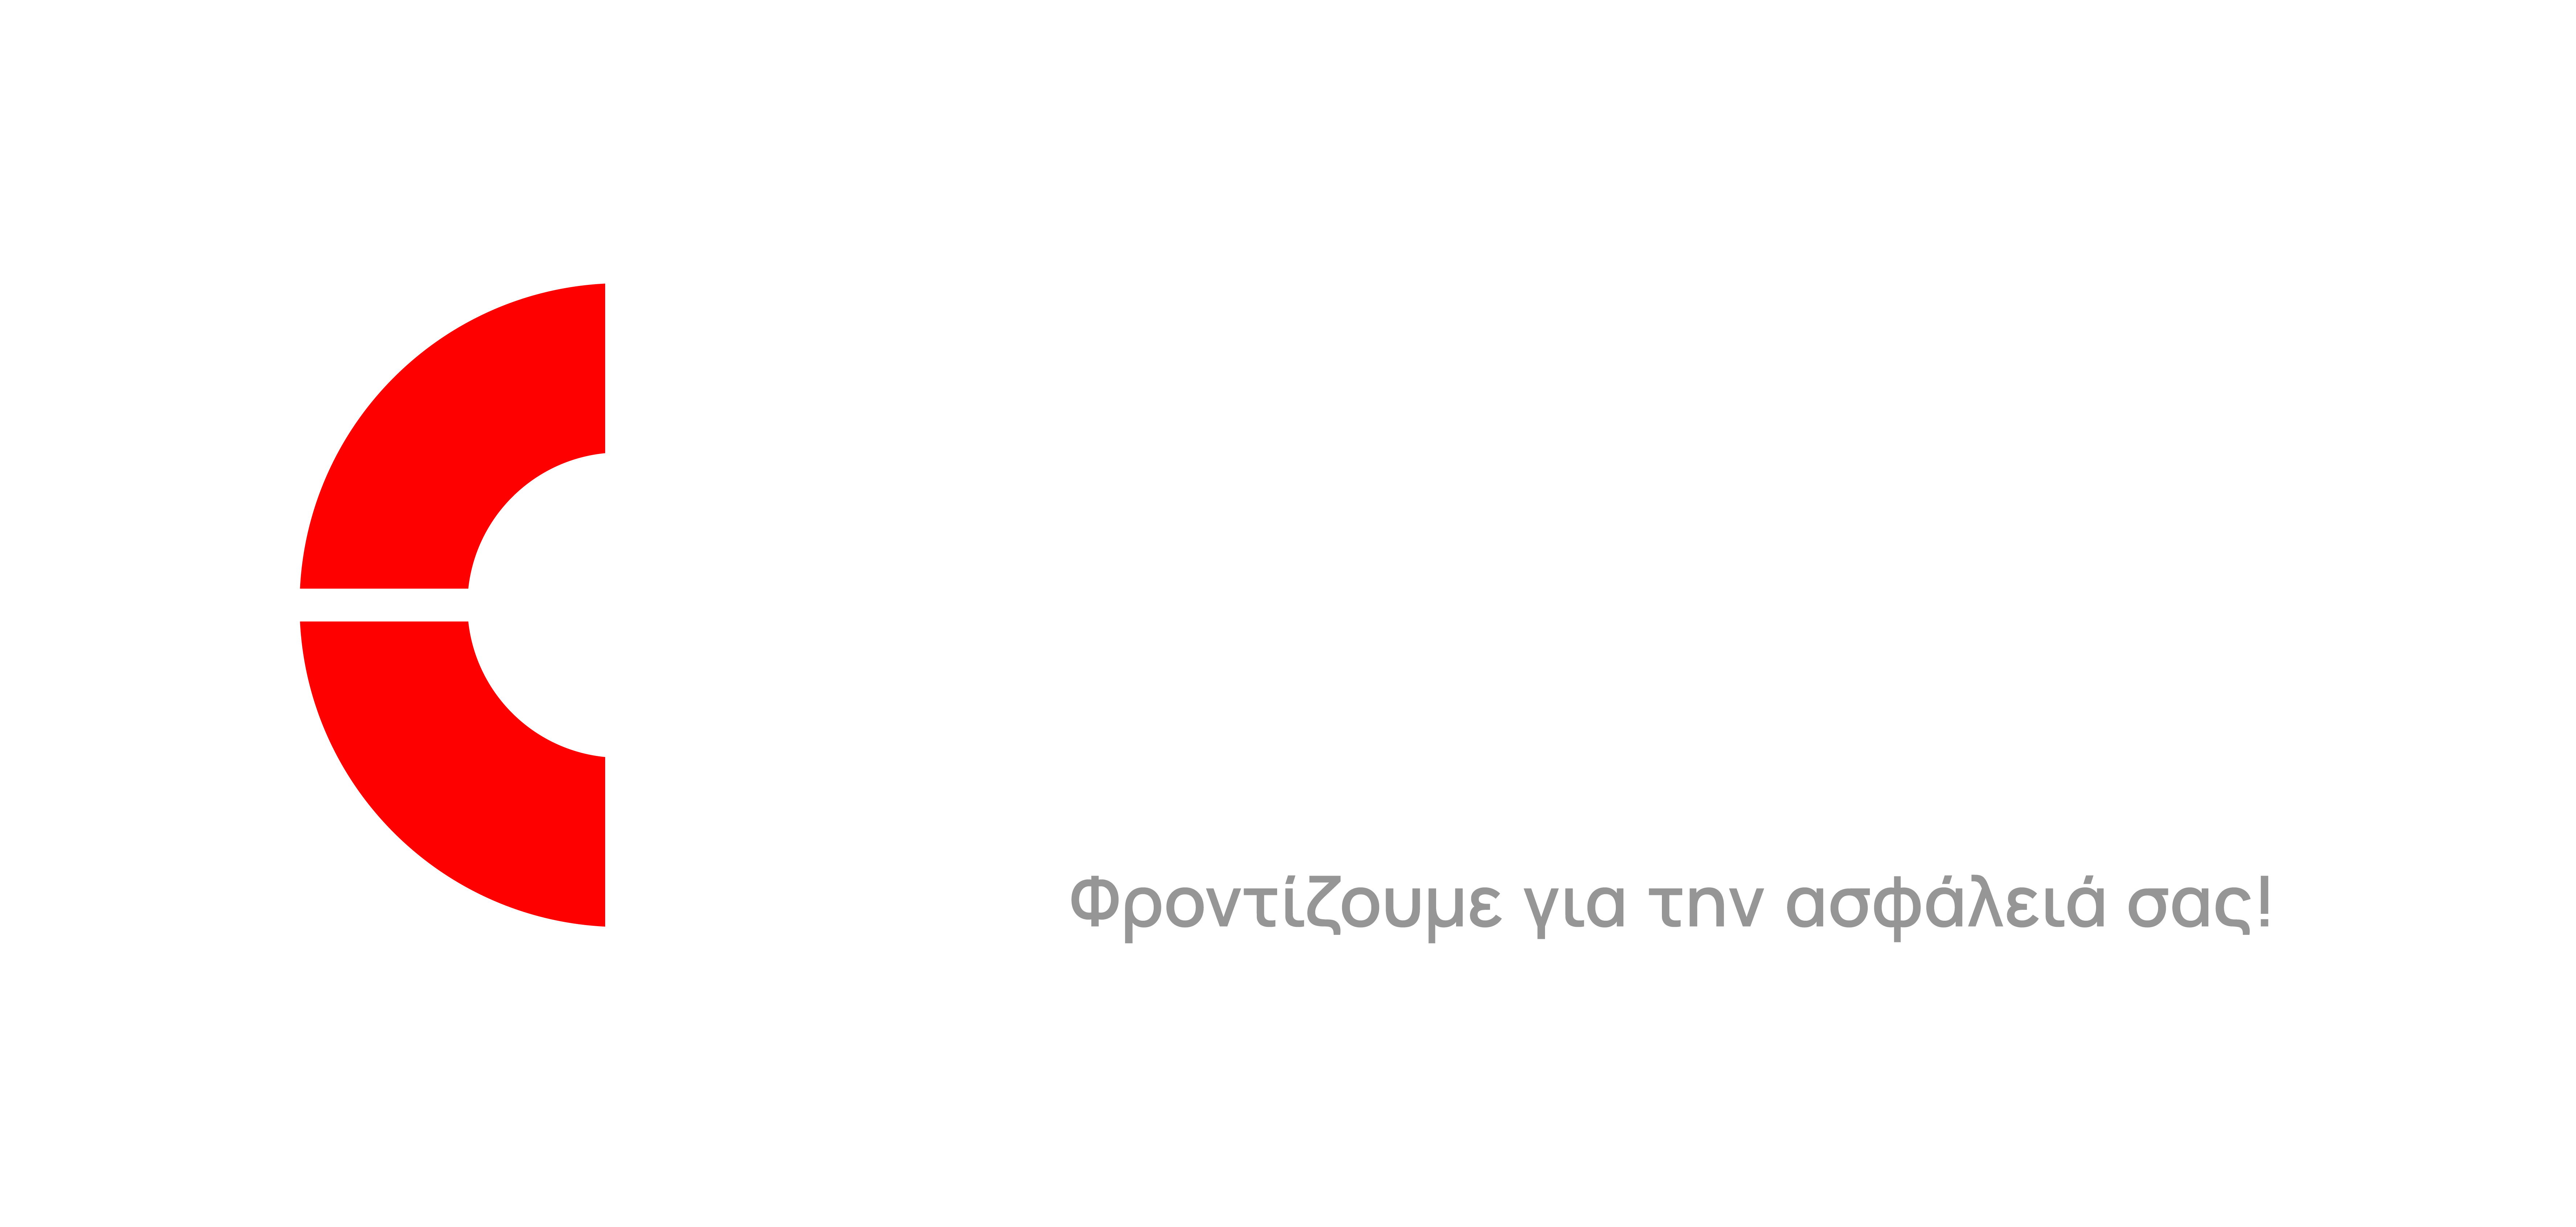 Care Security Systems